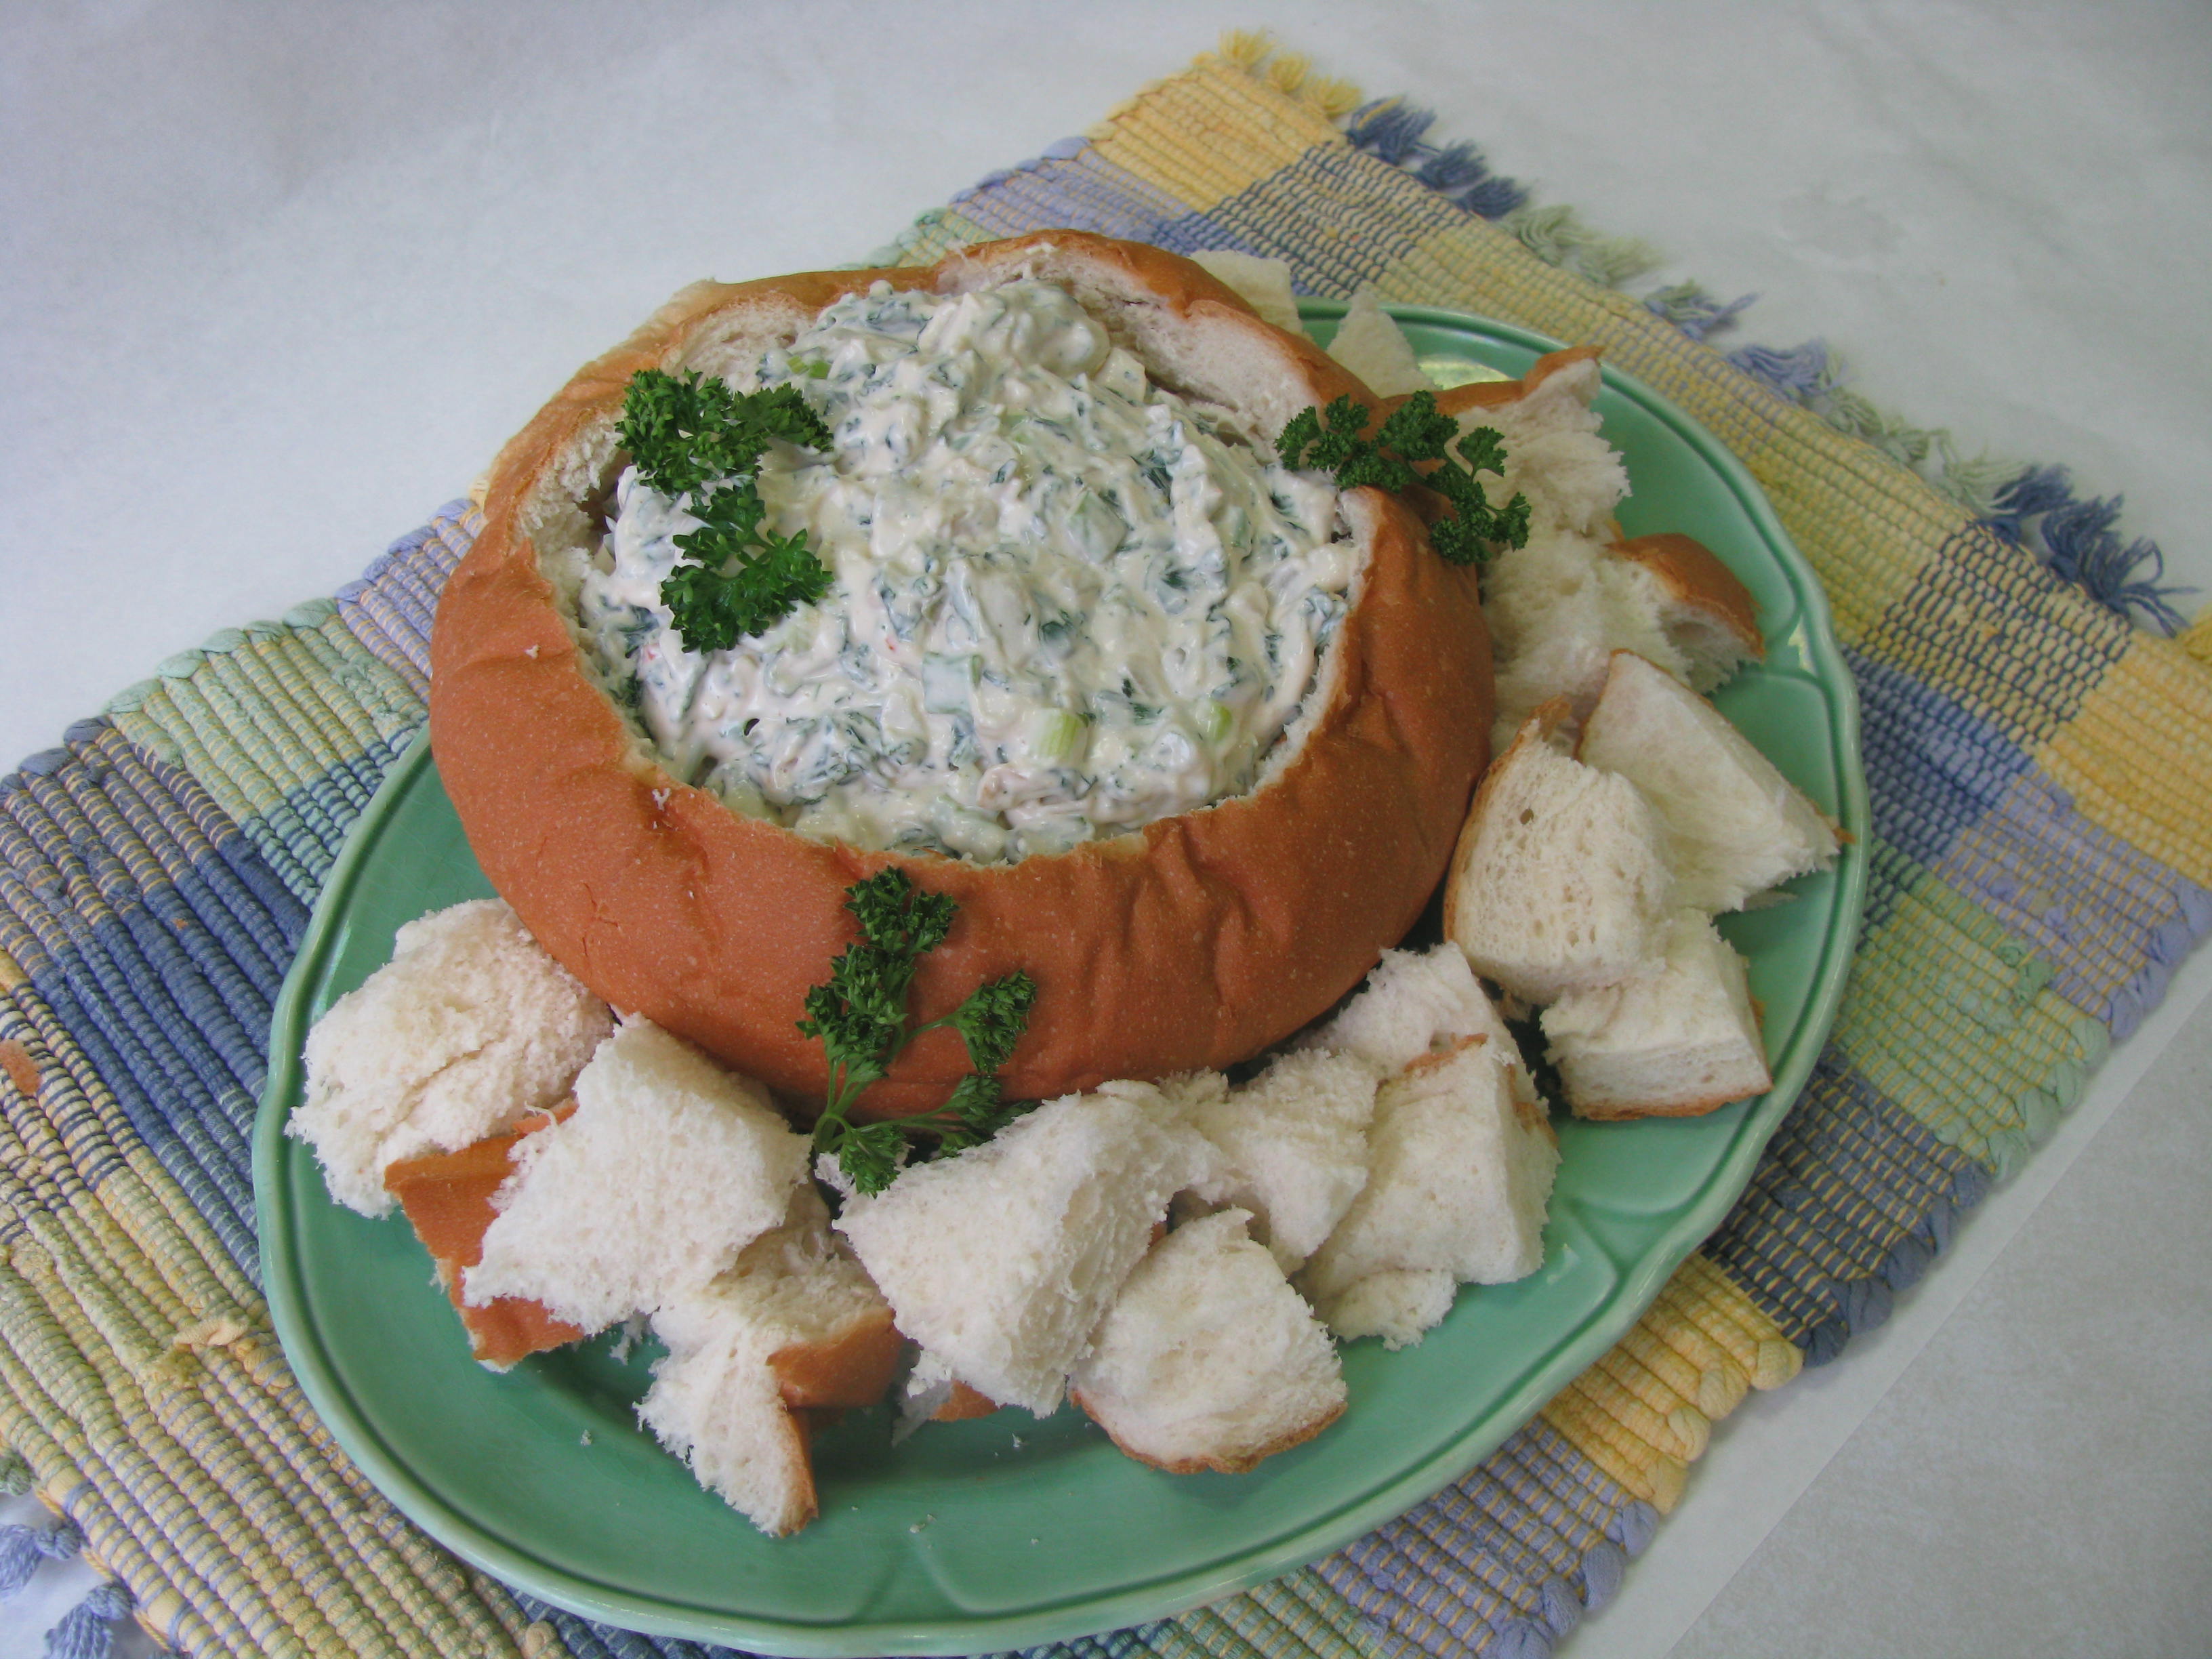 This spinach dip is perfect for spring gatherings. (NDSU photo)